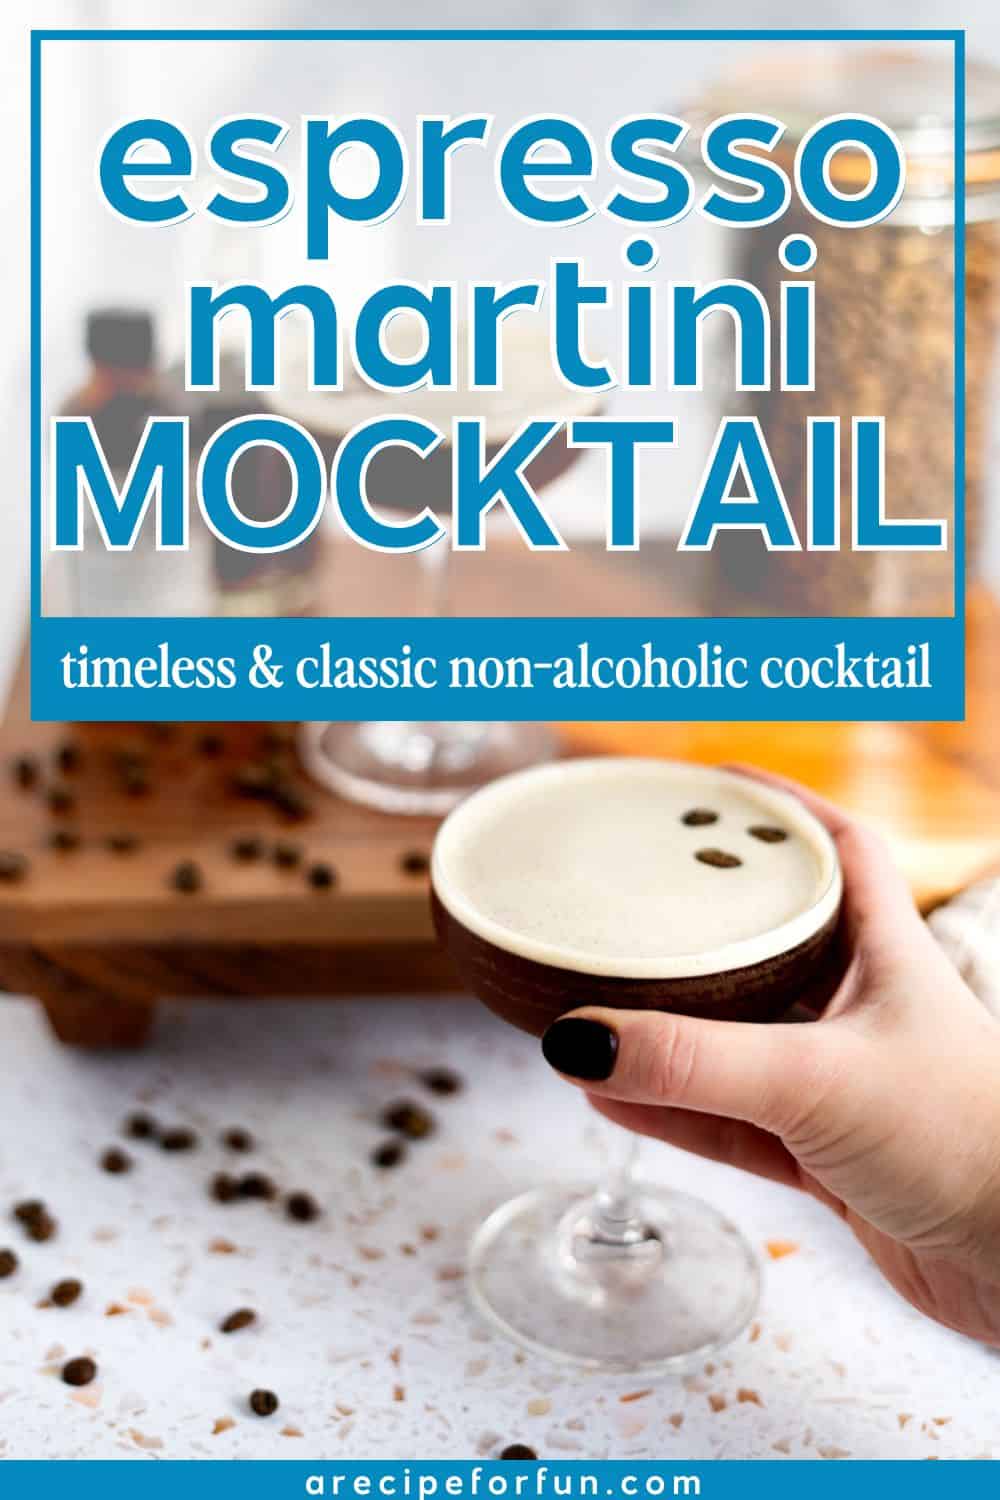 Pinterest Pin for a post about a recipe for an espresso martini mocktail